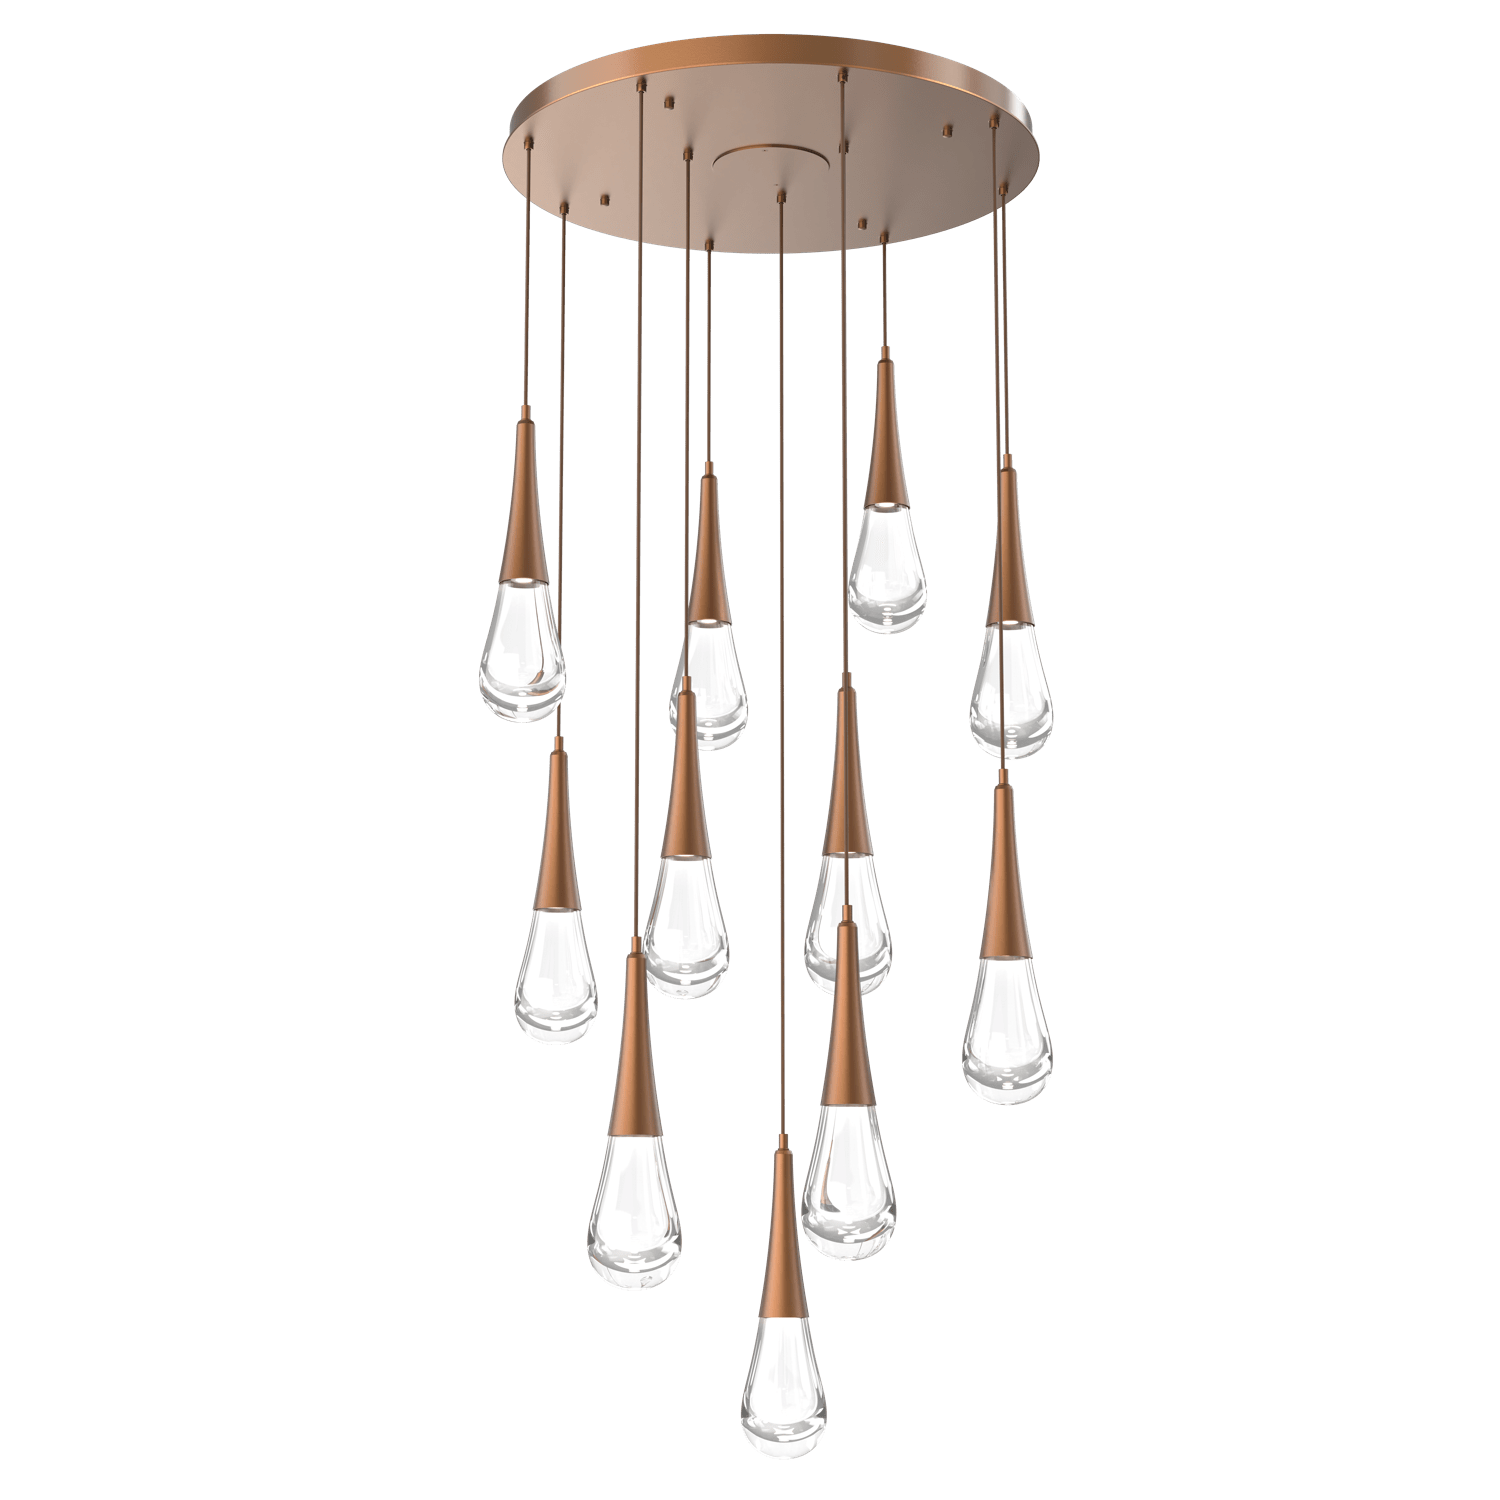 CHB0078-11-BB-Hammerton-Studio-Raindrop-11-light-round-pendant-chandelier-with-burnished-bronze-finish-and-clear-blown-glass-shades-and-LED-lamping